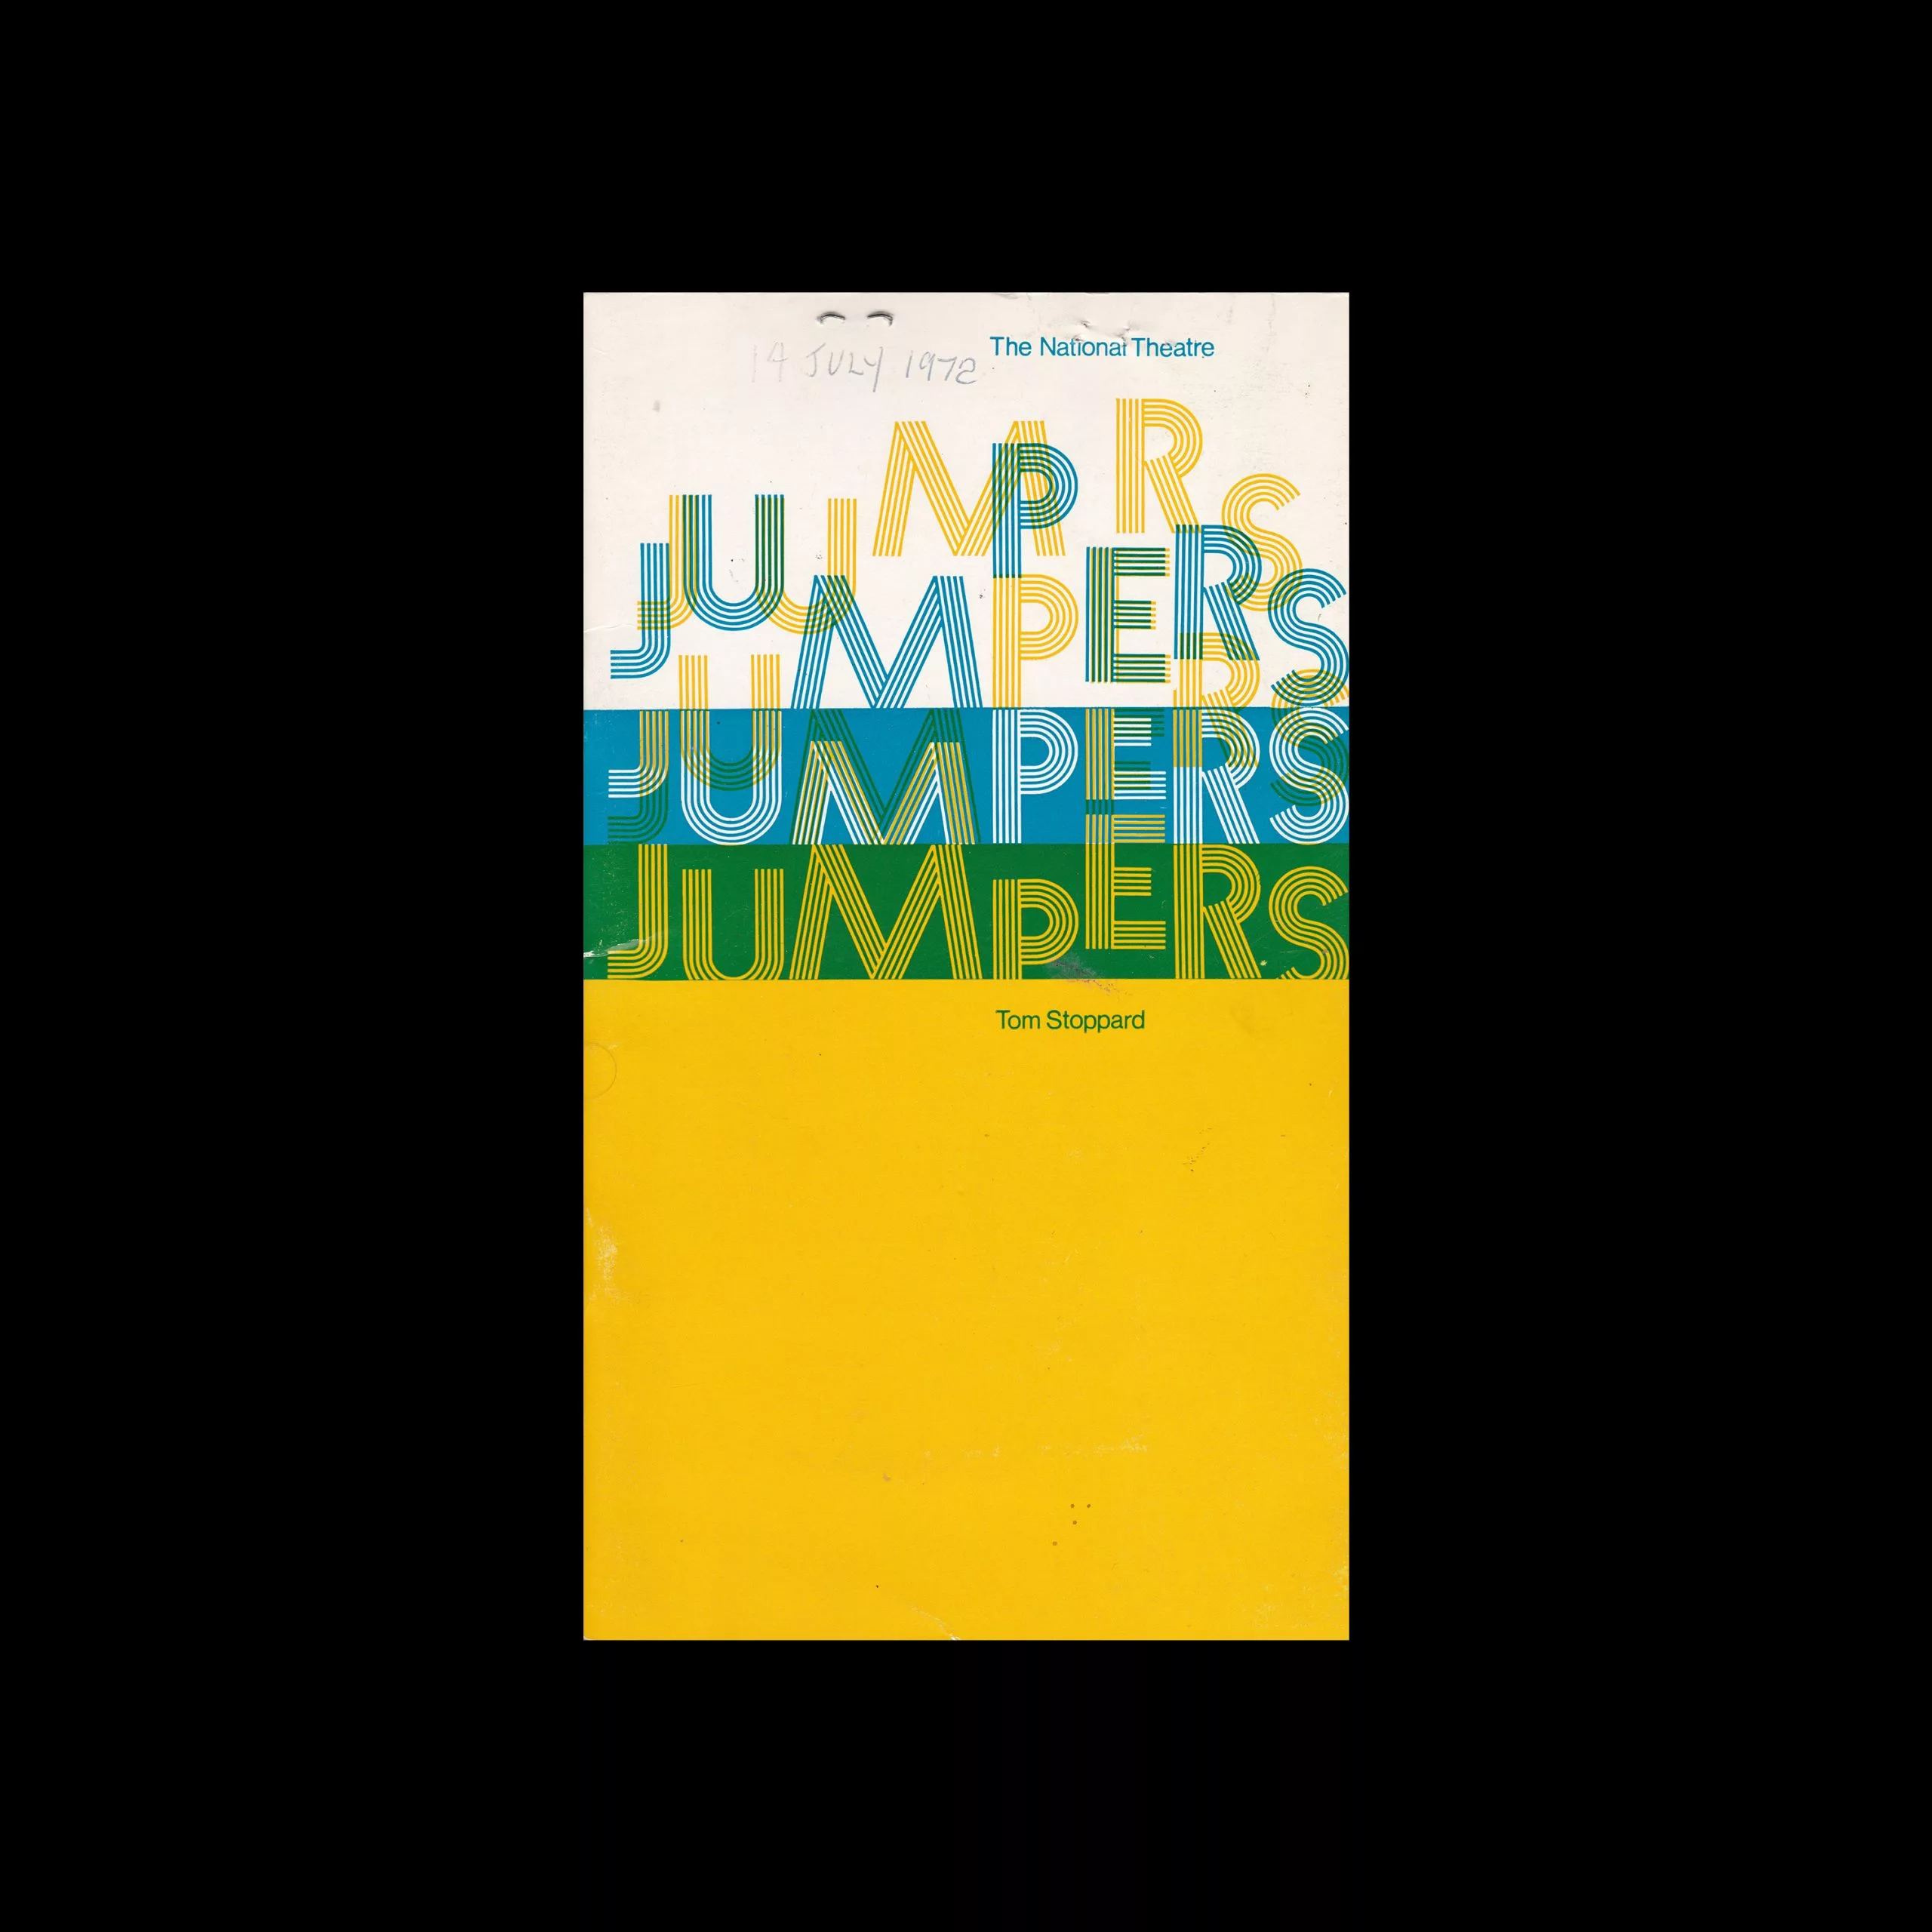 Jumpers, The National Theatre, London, 1972. Designed by Ken Briggs